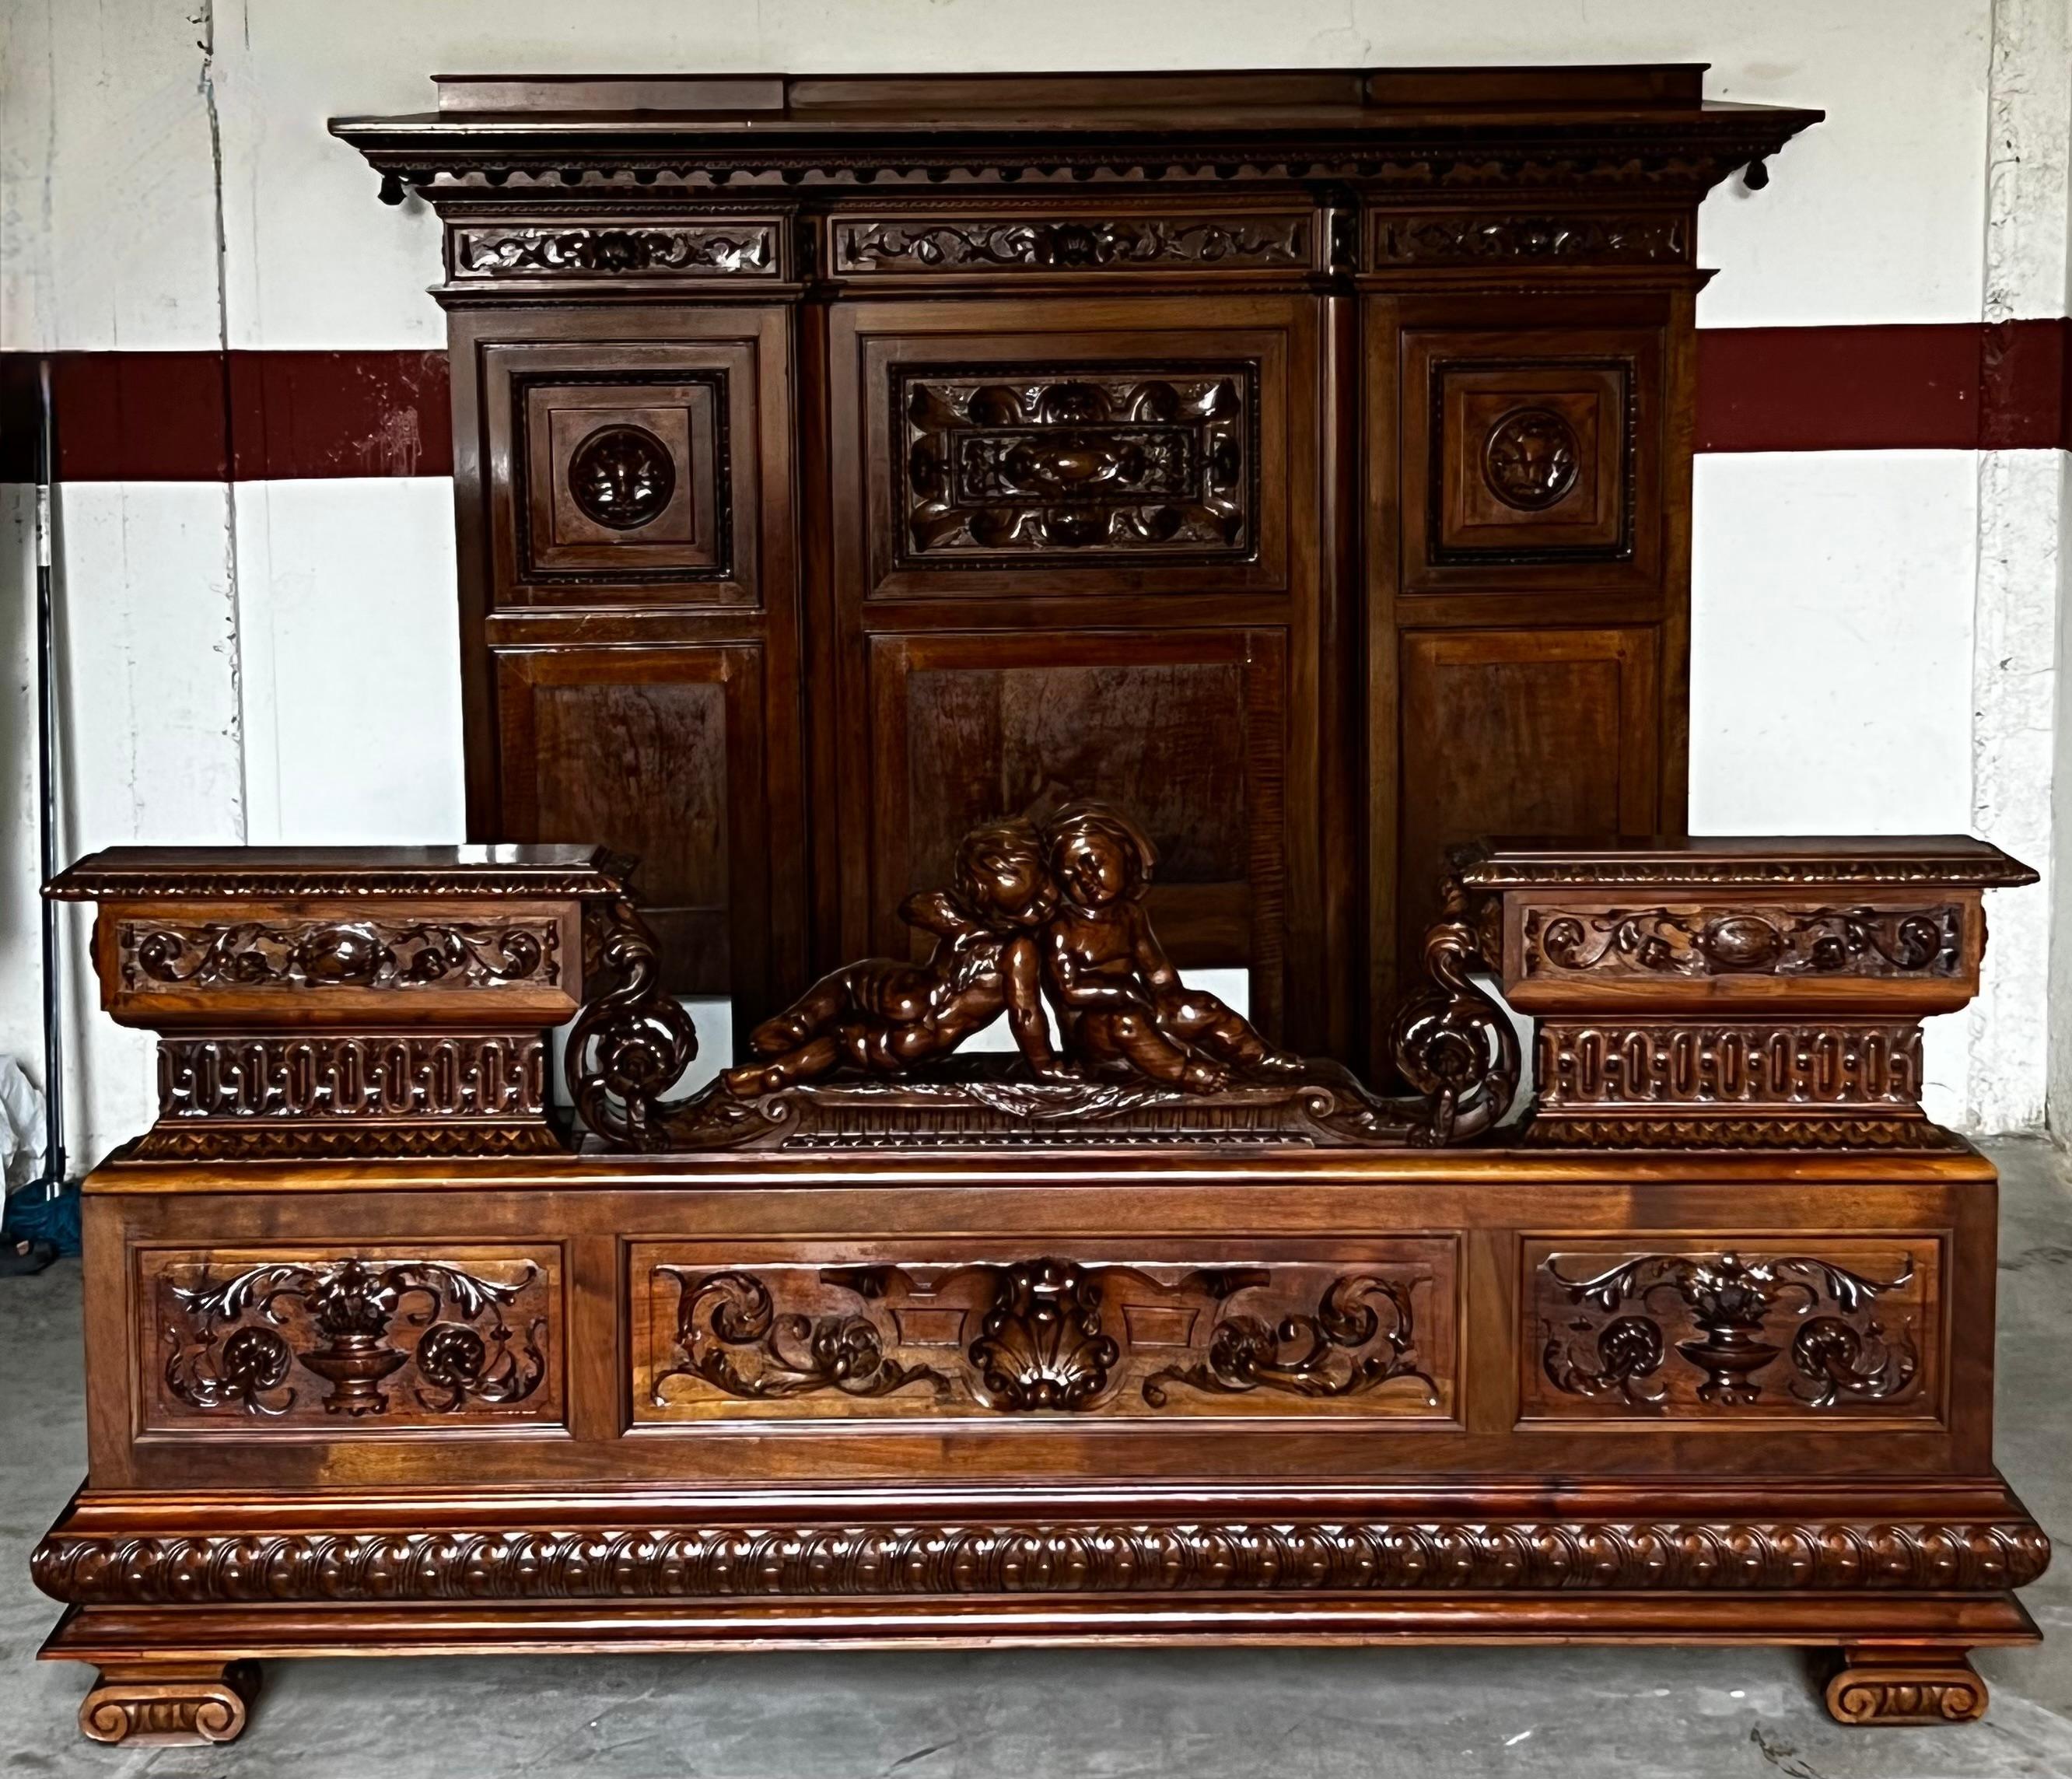 This bed was privately commissioned by a collector about 40 years ago representing a rare opportunity to purchase a vintage, hand-crafted bed made to the highest standards in the Renaissance-architectural-style , figurative and armorial carving. •